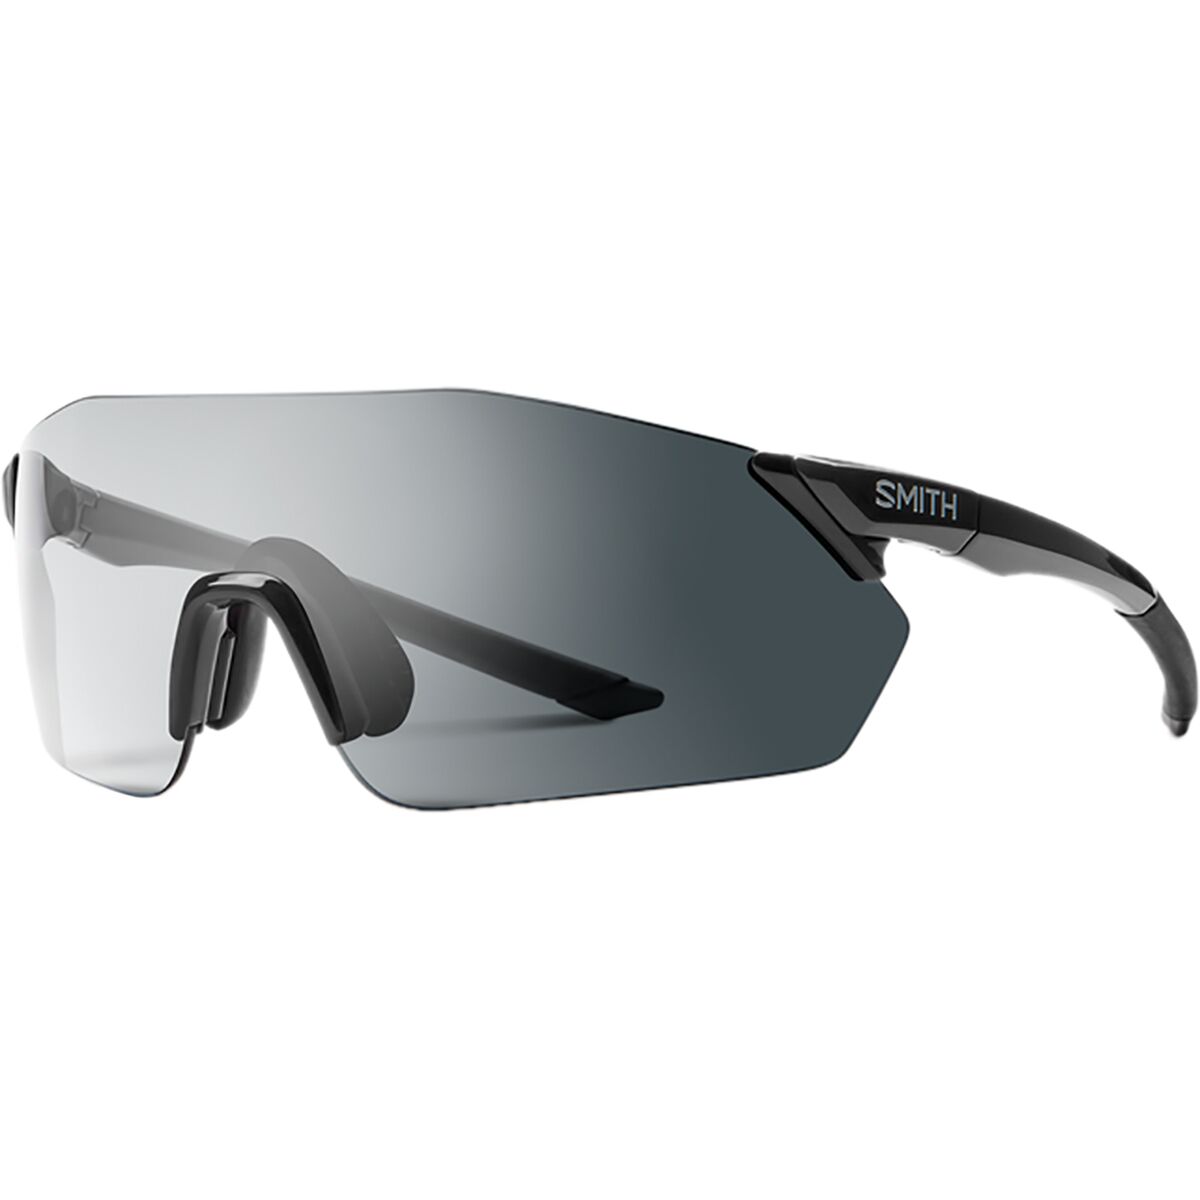 Cycling Sunglasses - Bicycling Glasses